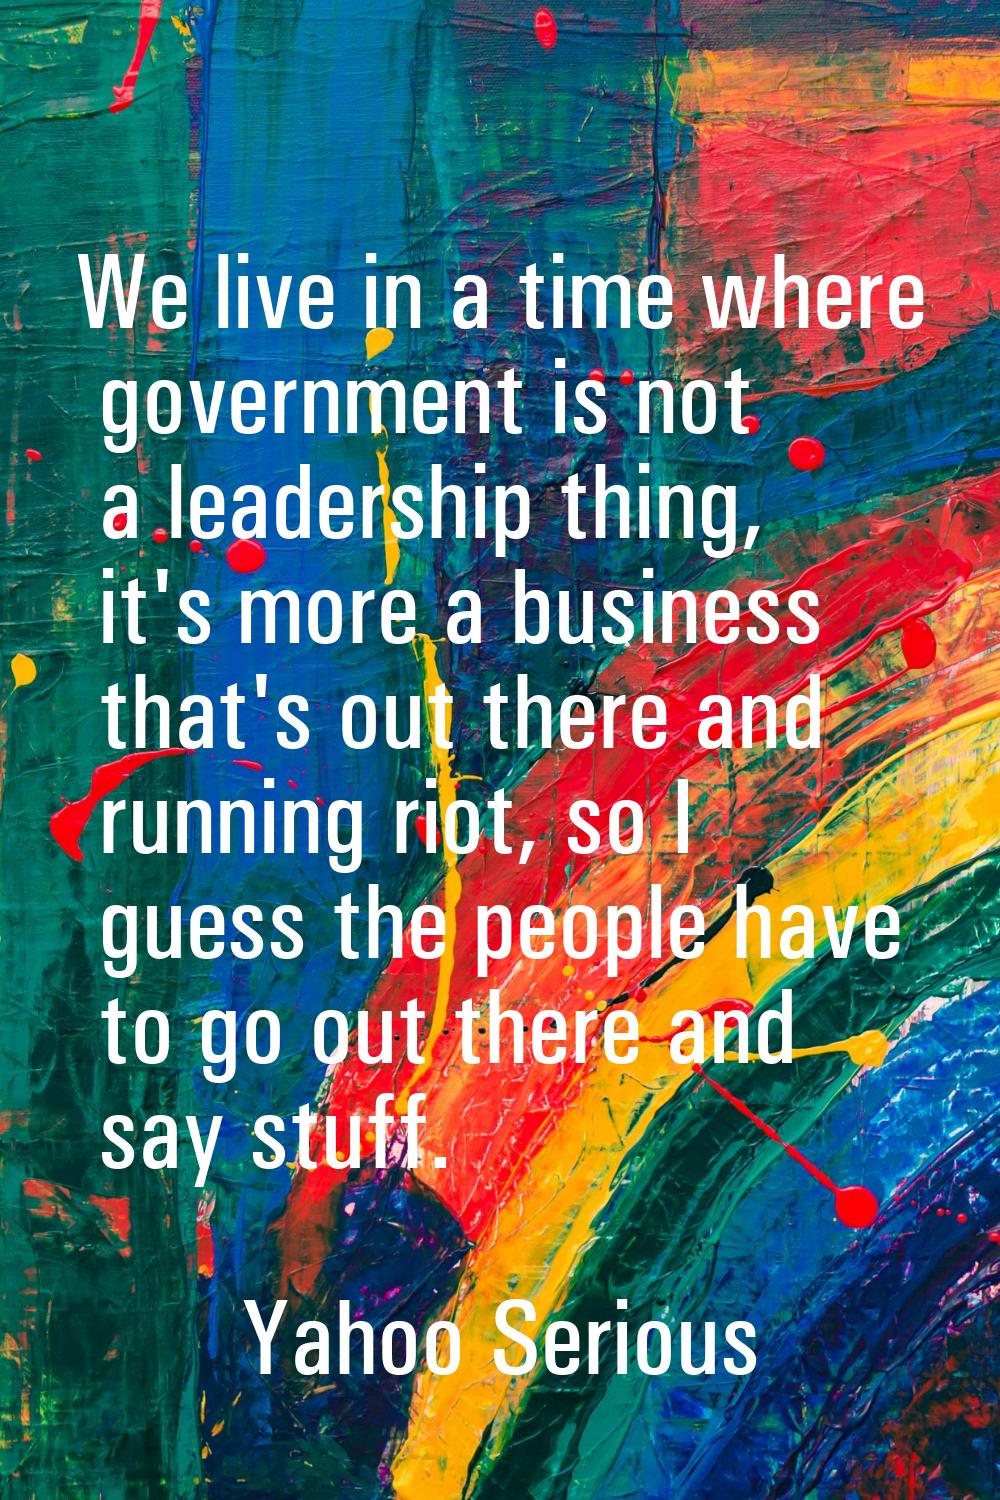 We live in a time where government is not a leadership thing, it's more a business that's out there